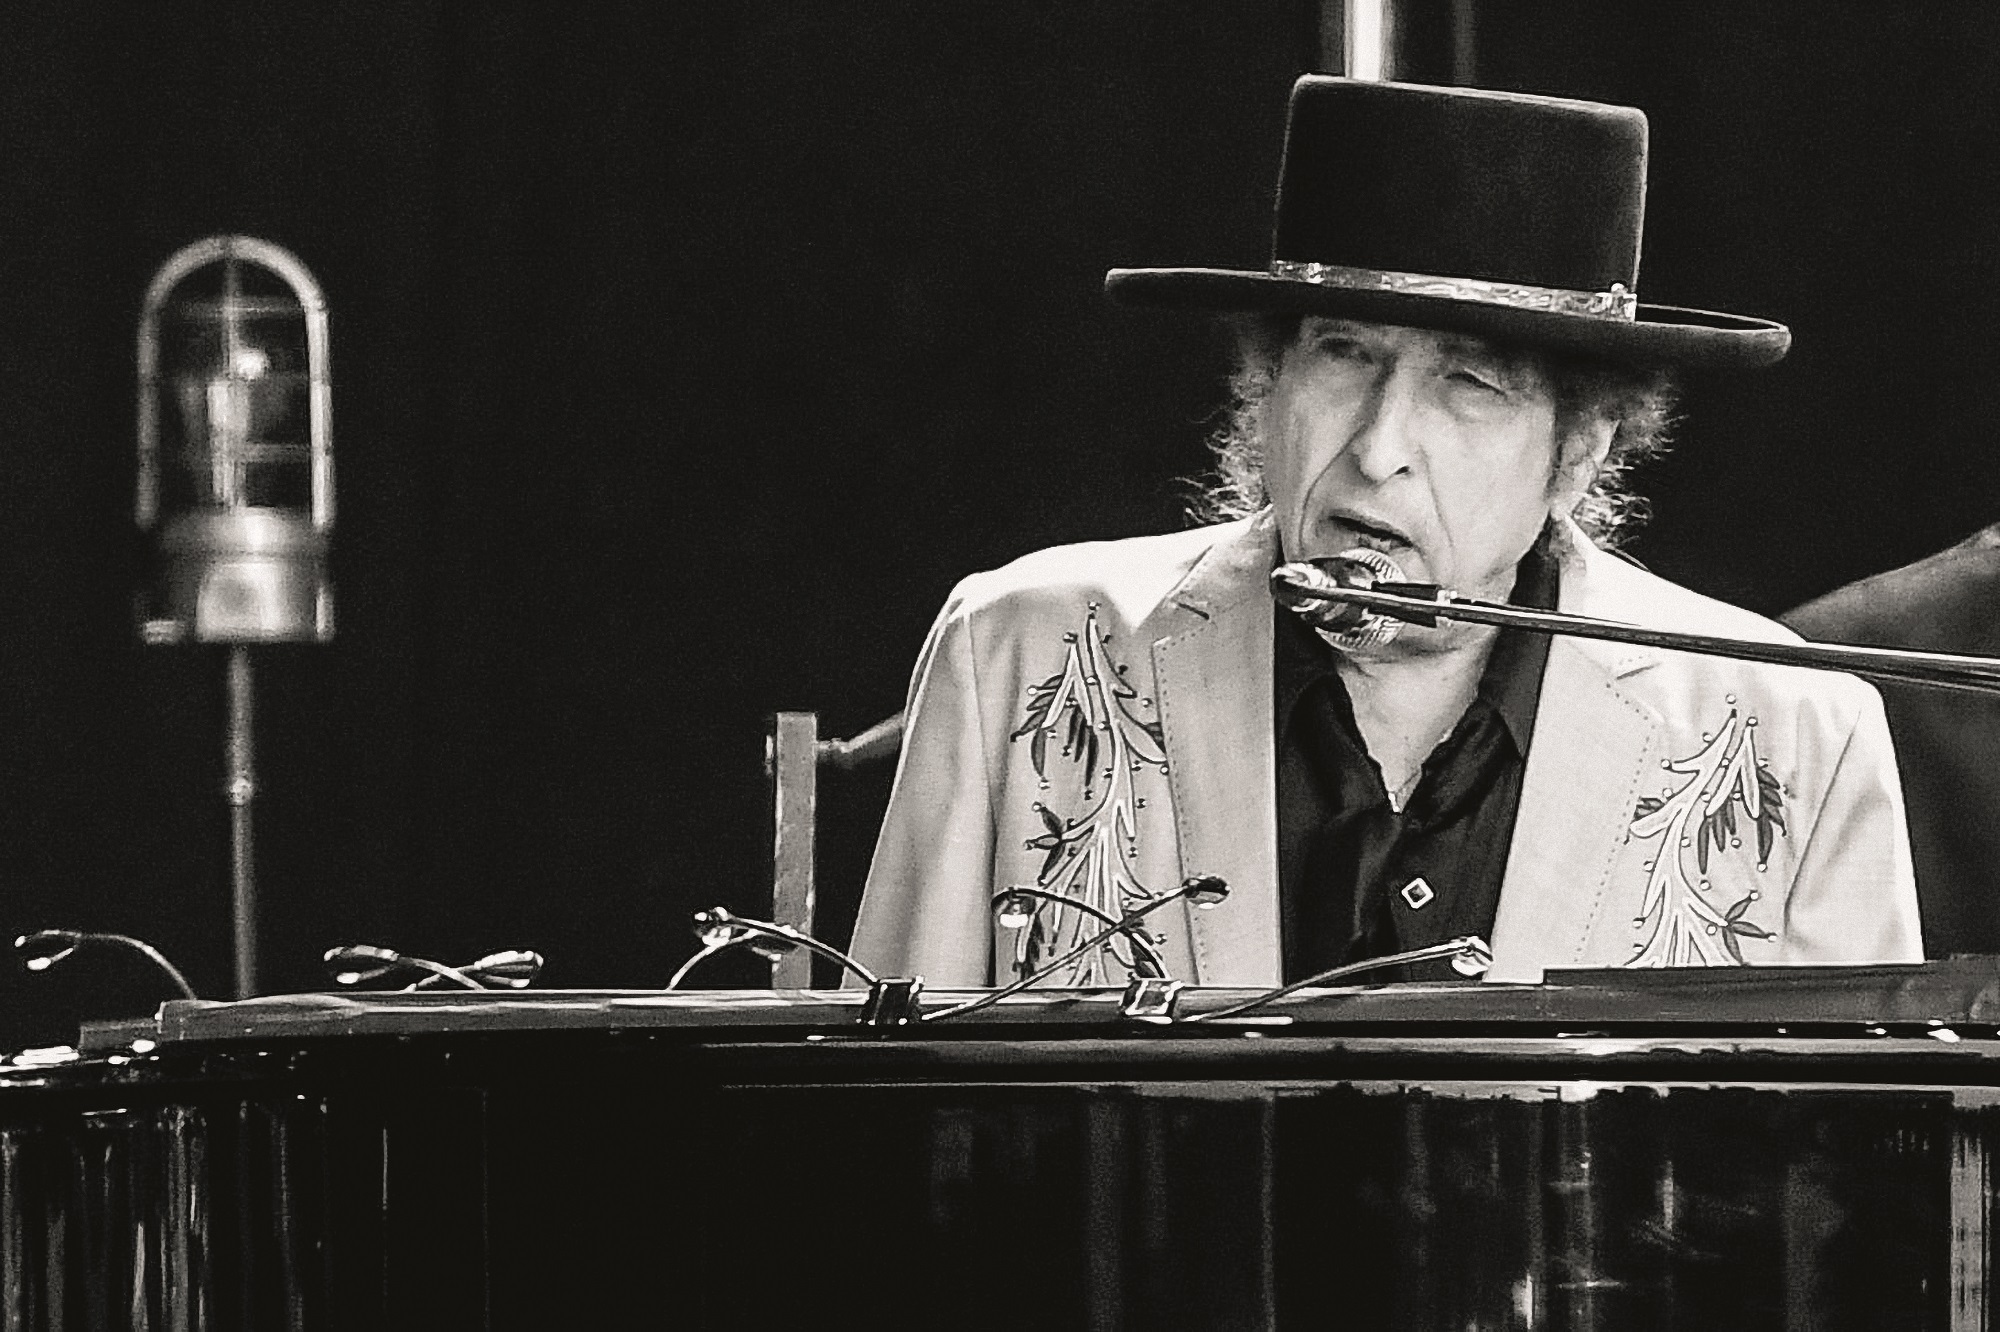 LONDON, ENGLAND - JULY 12: Editors note - image converted to black and white: Bob Dylan performs as part of a double bill with Neil Young at Hyde Park on July 12, 2019 in London, England. (Photo by Dave J Hogan/Getty Images for ABA)